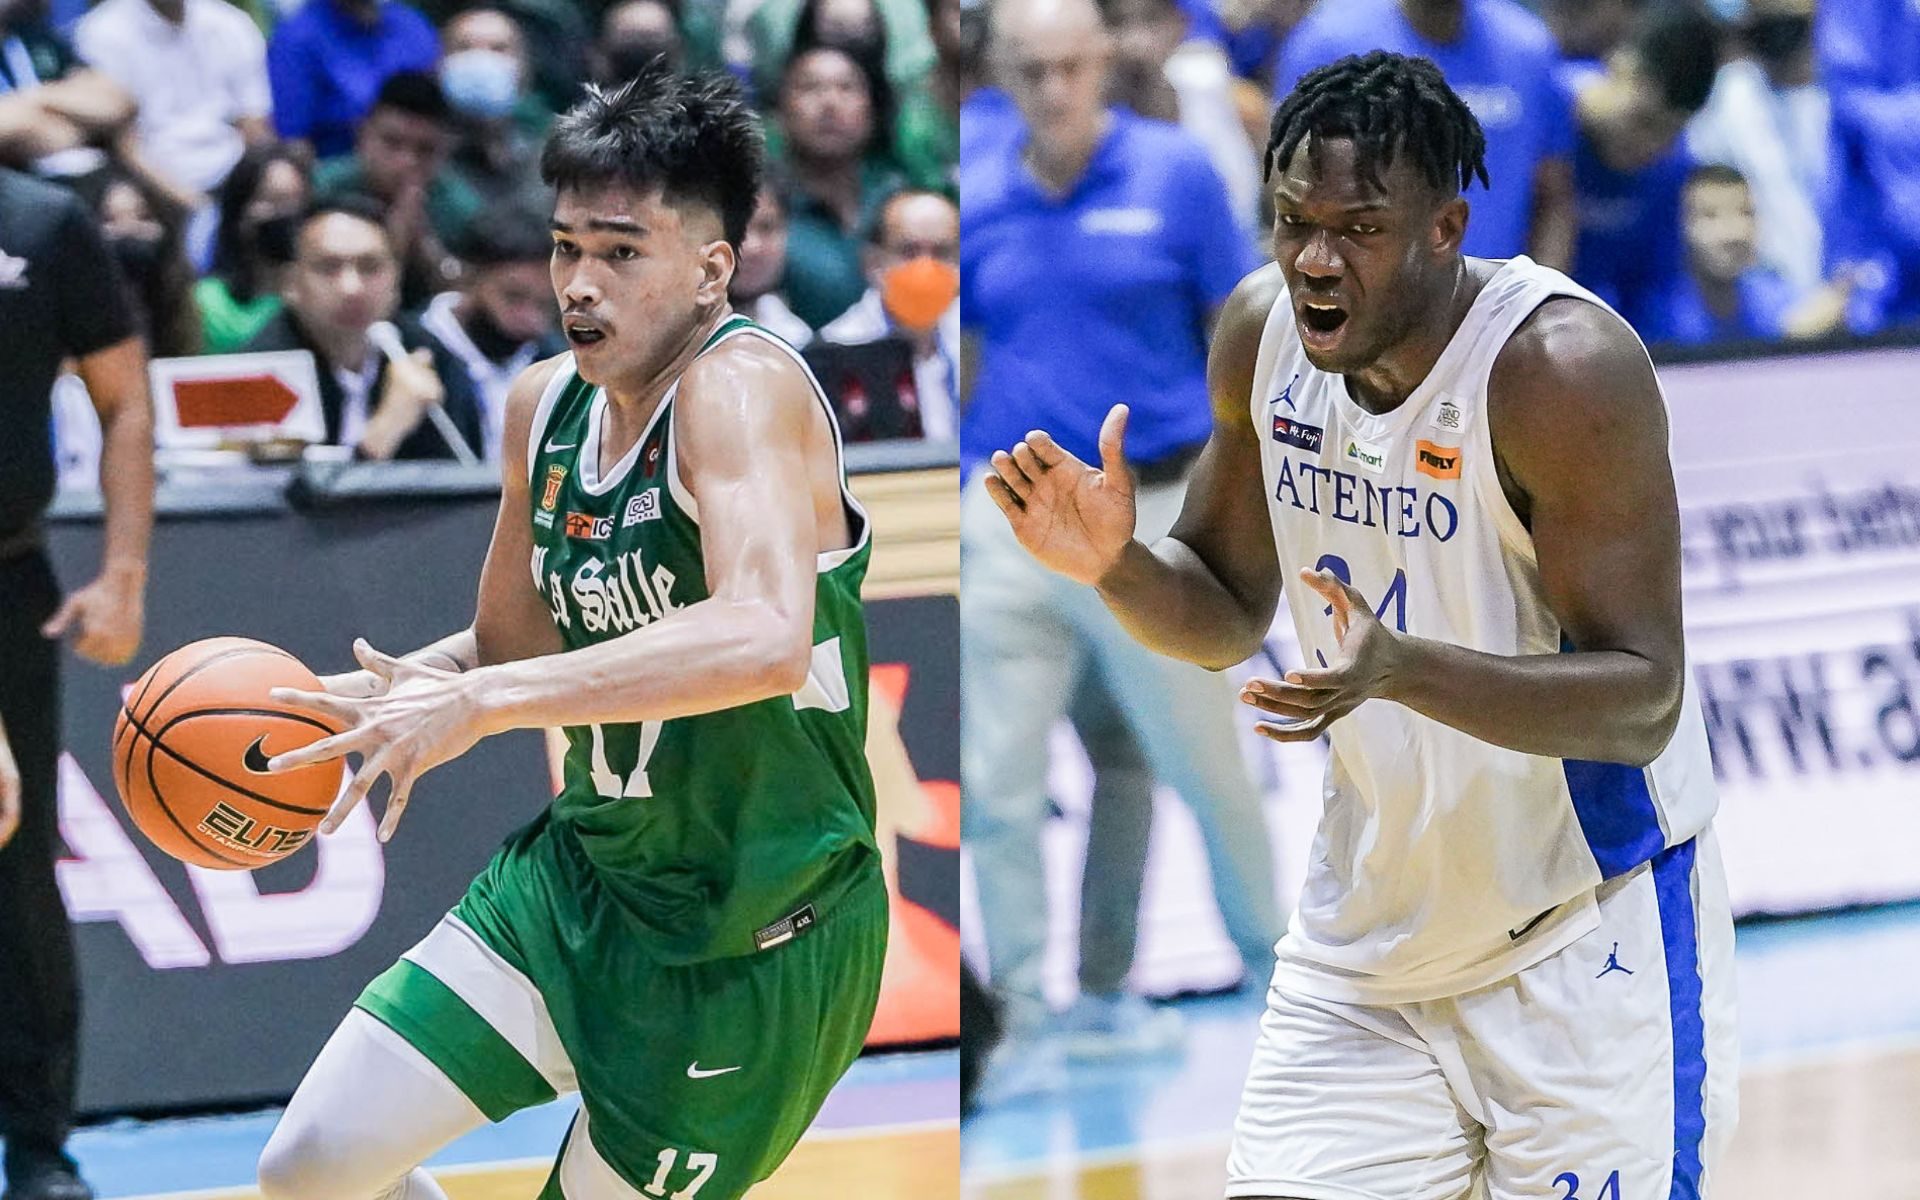 Amid UAAP title chase, rivals Kouame, Quiambao keep Gilas commitment